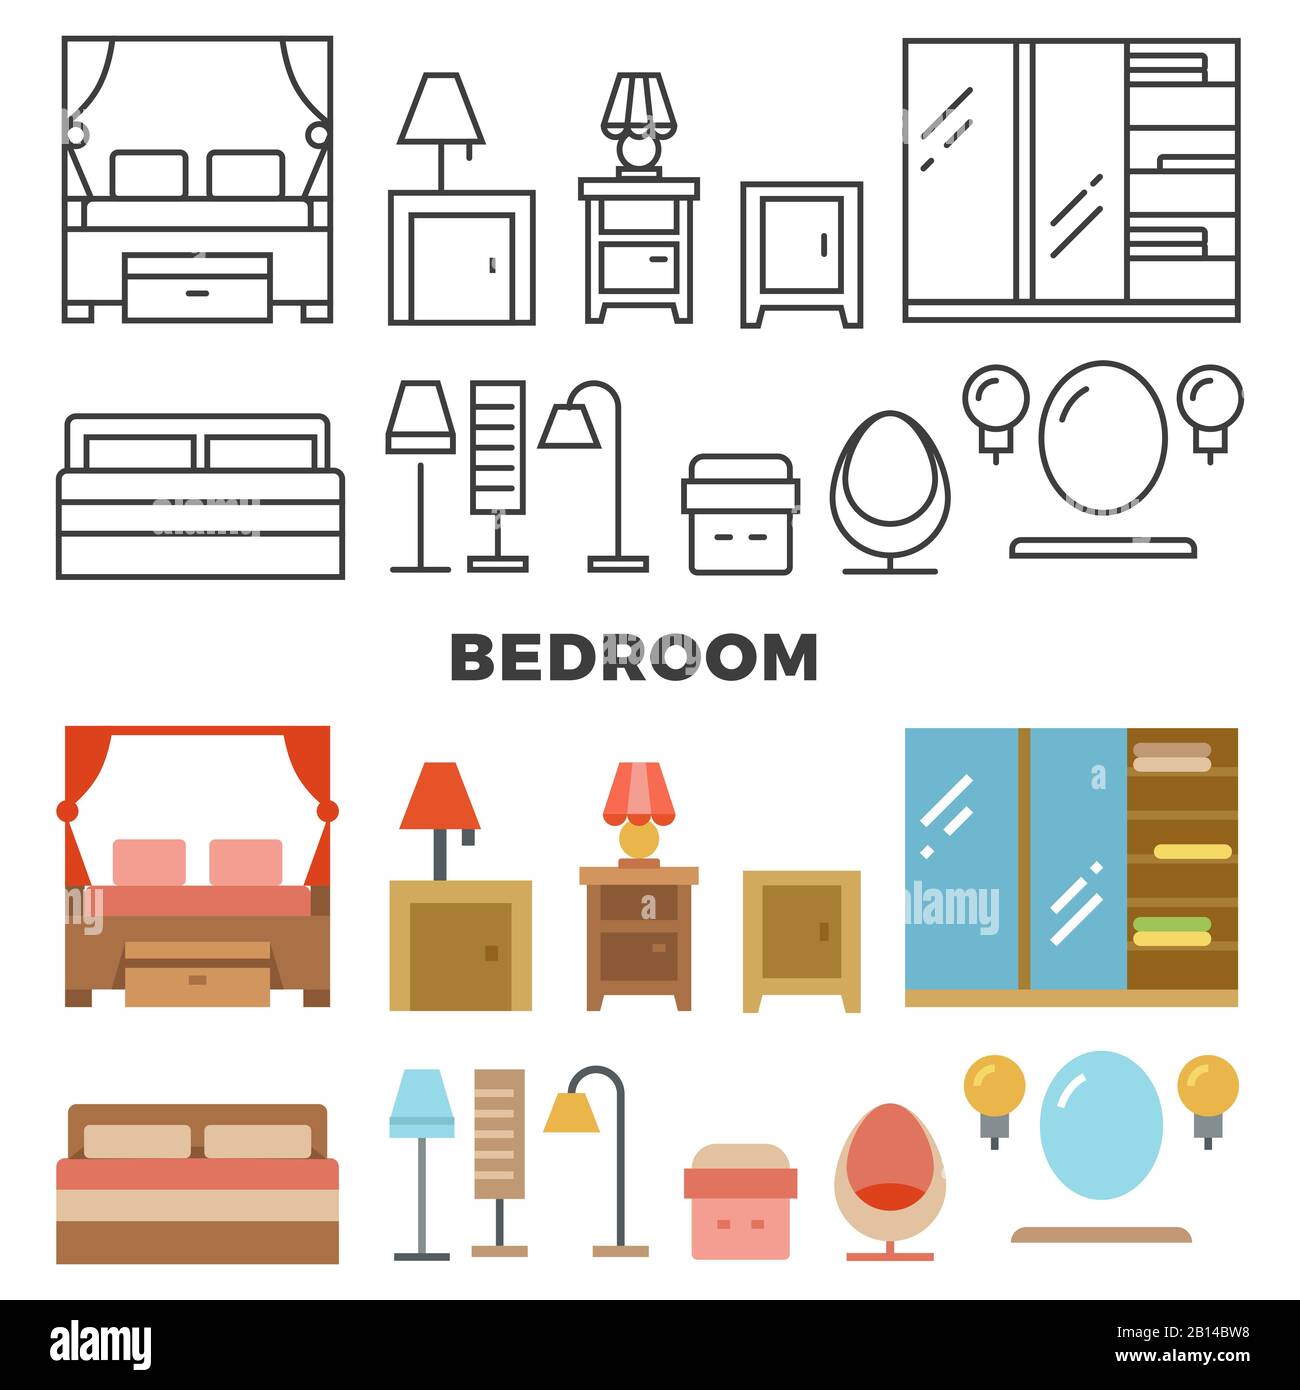 Bedroom furniture and accessories collection - flat furniture icons. Bed and chair interior, vector illustration Stock Vector